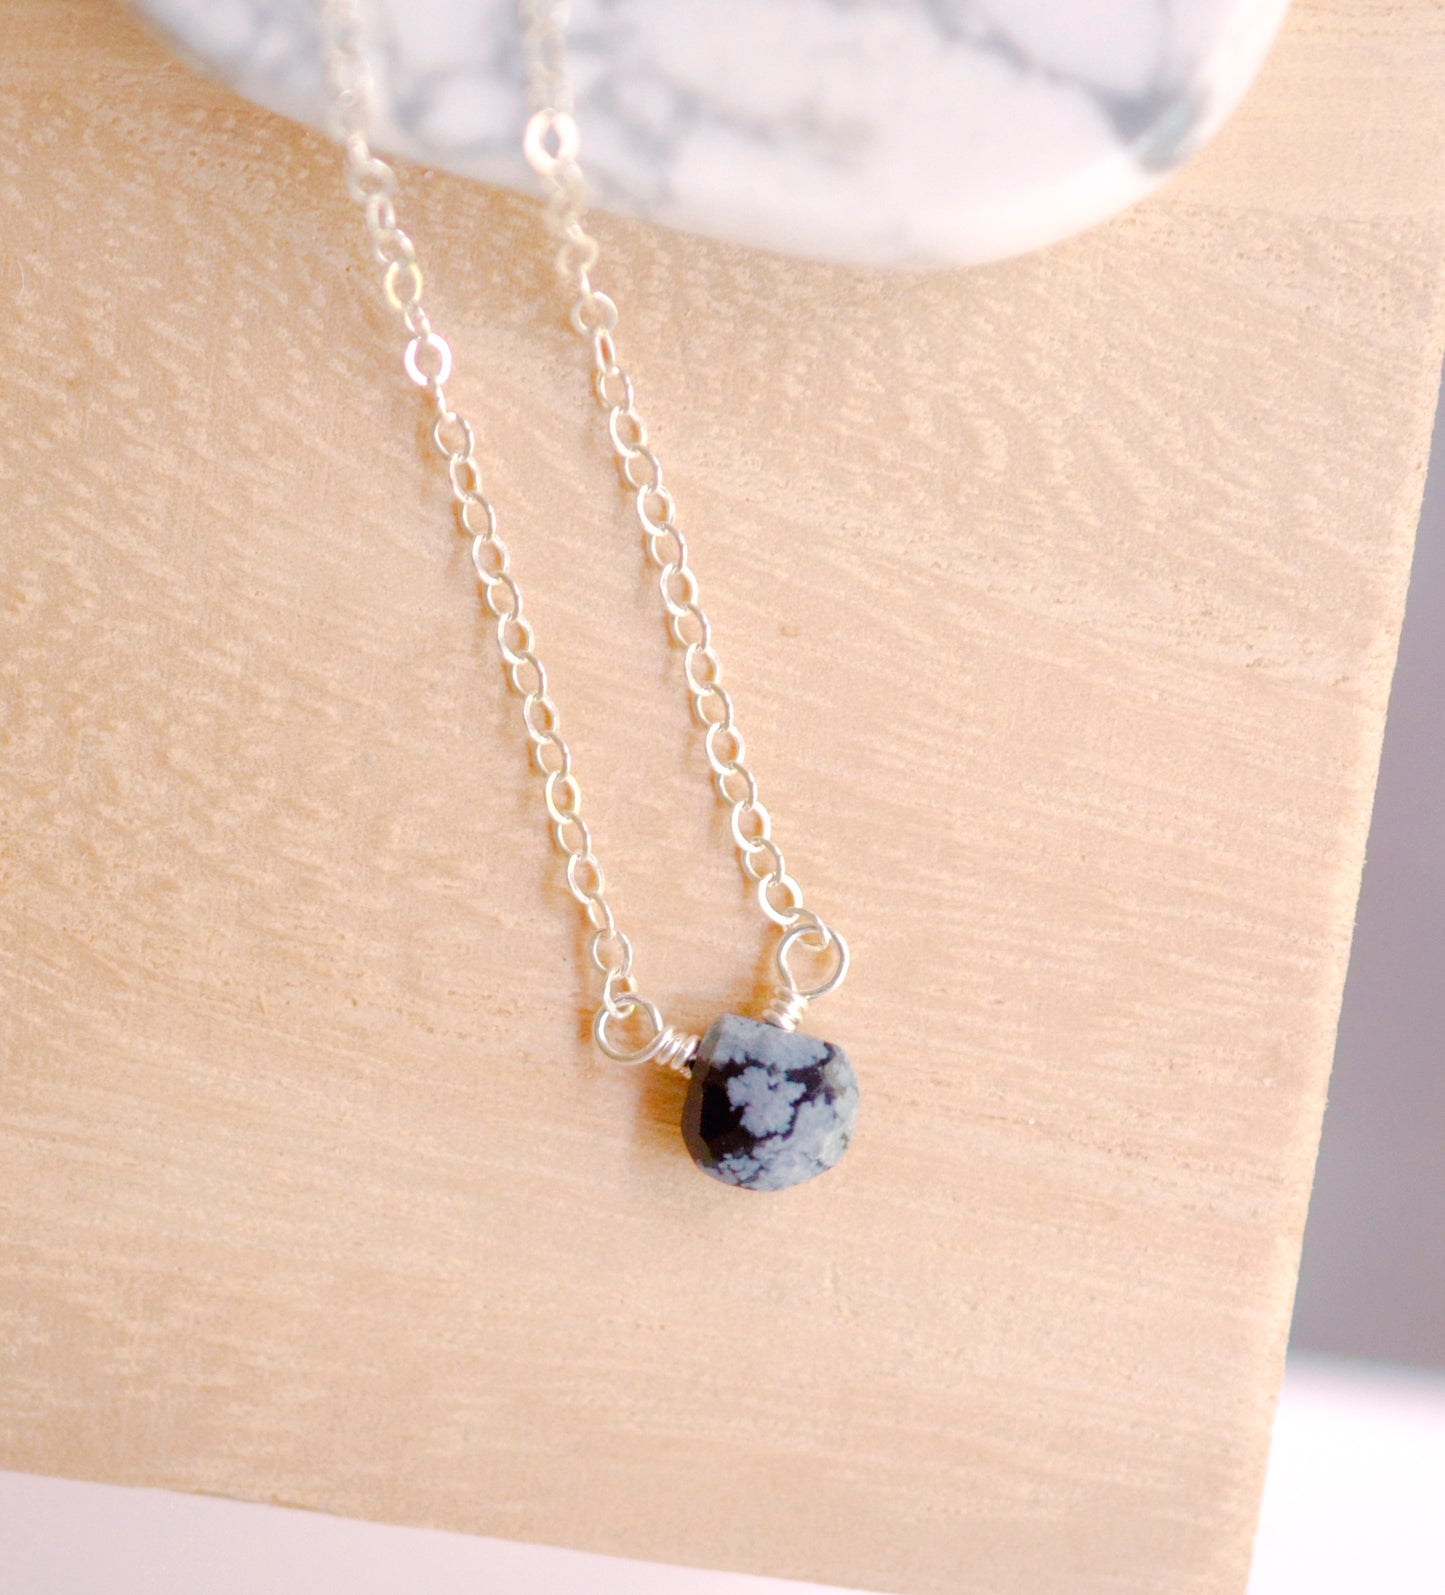 Black Snowflake Obsidian Necklace, Sterling Silver or Gold Filled